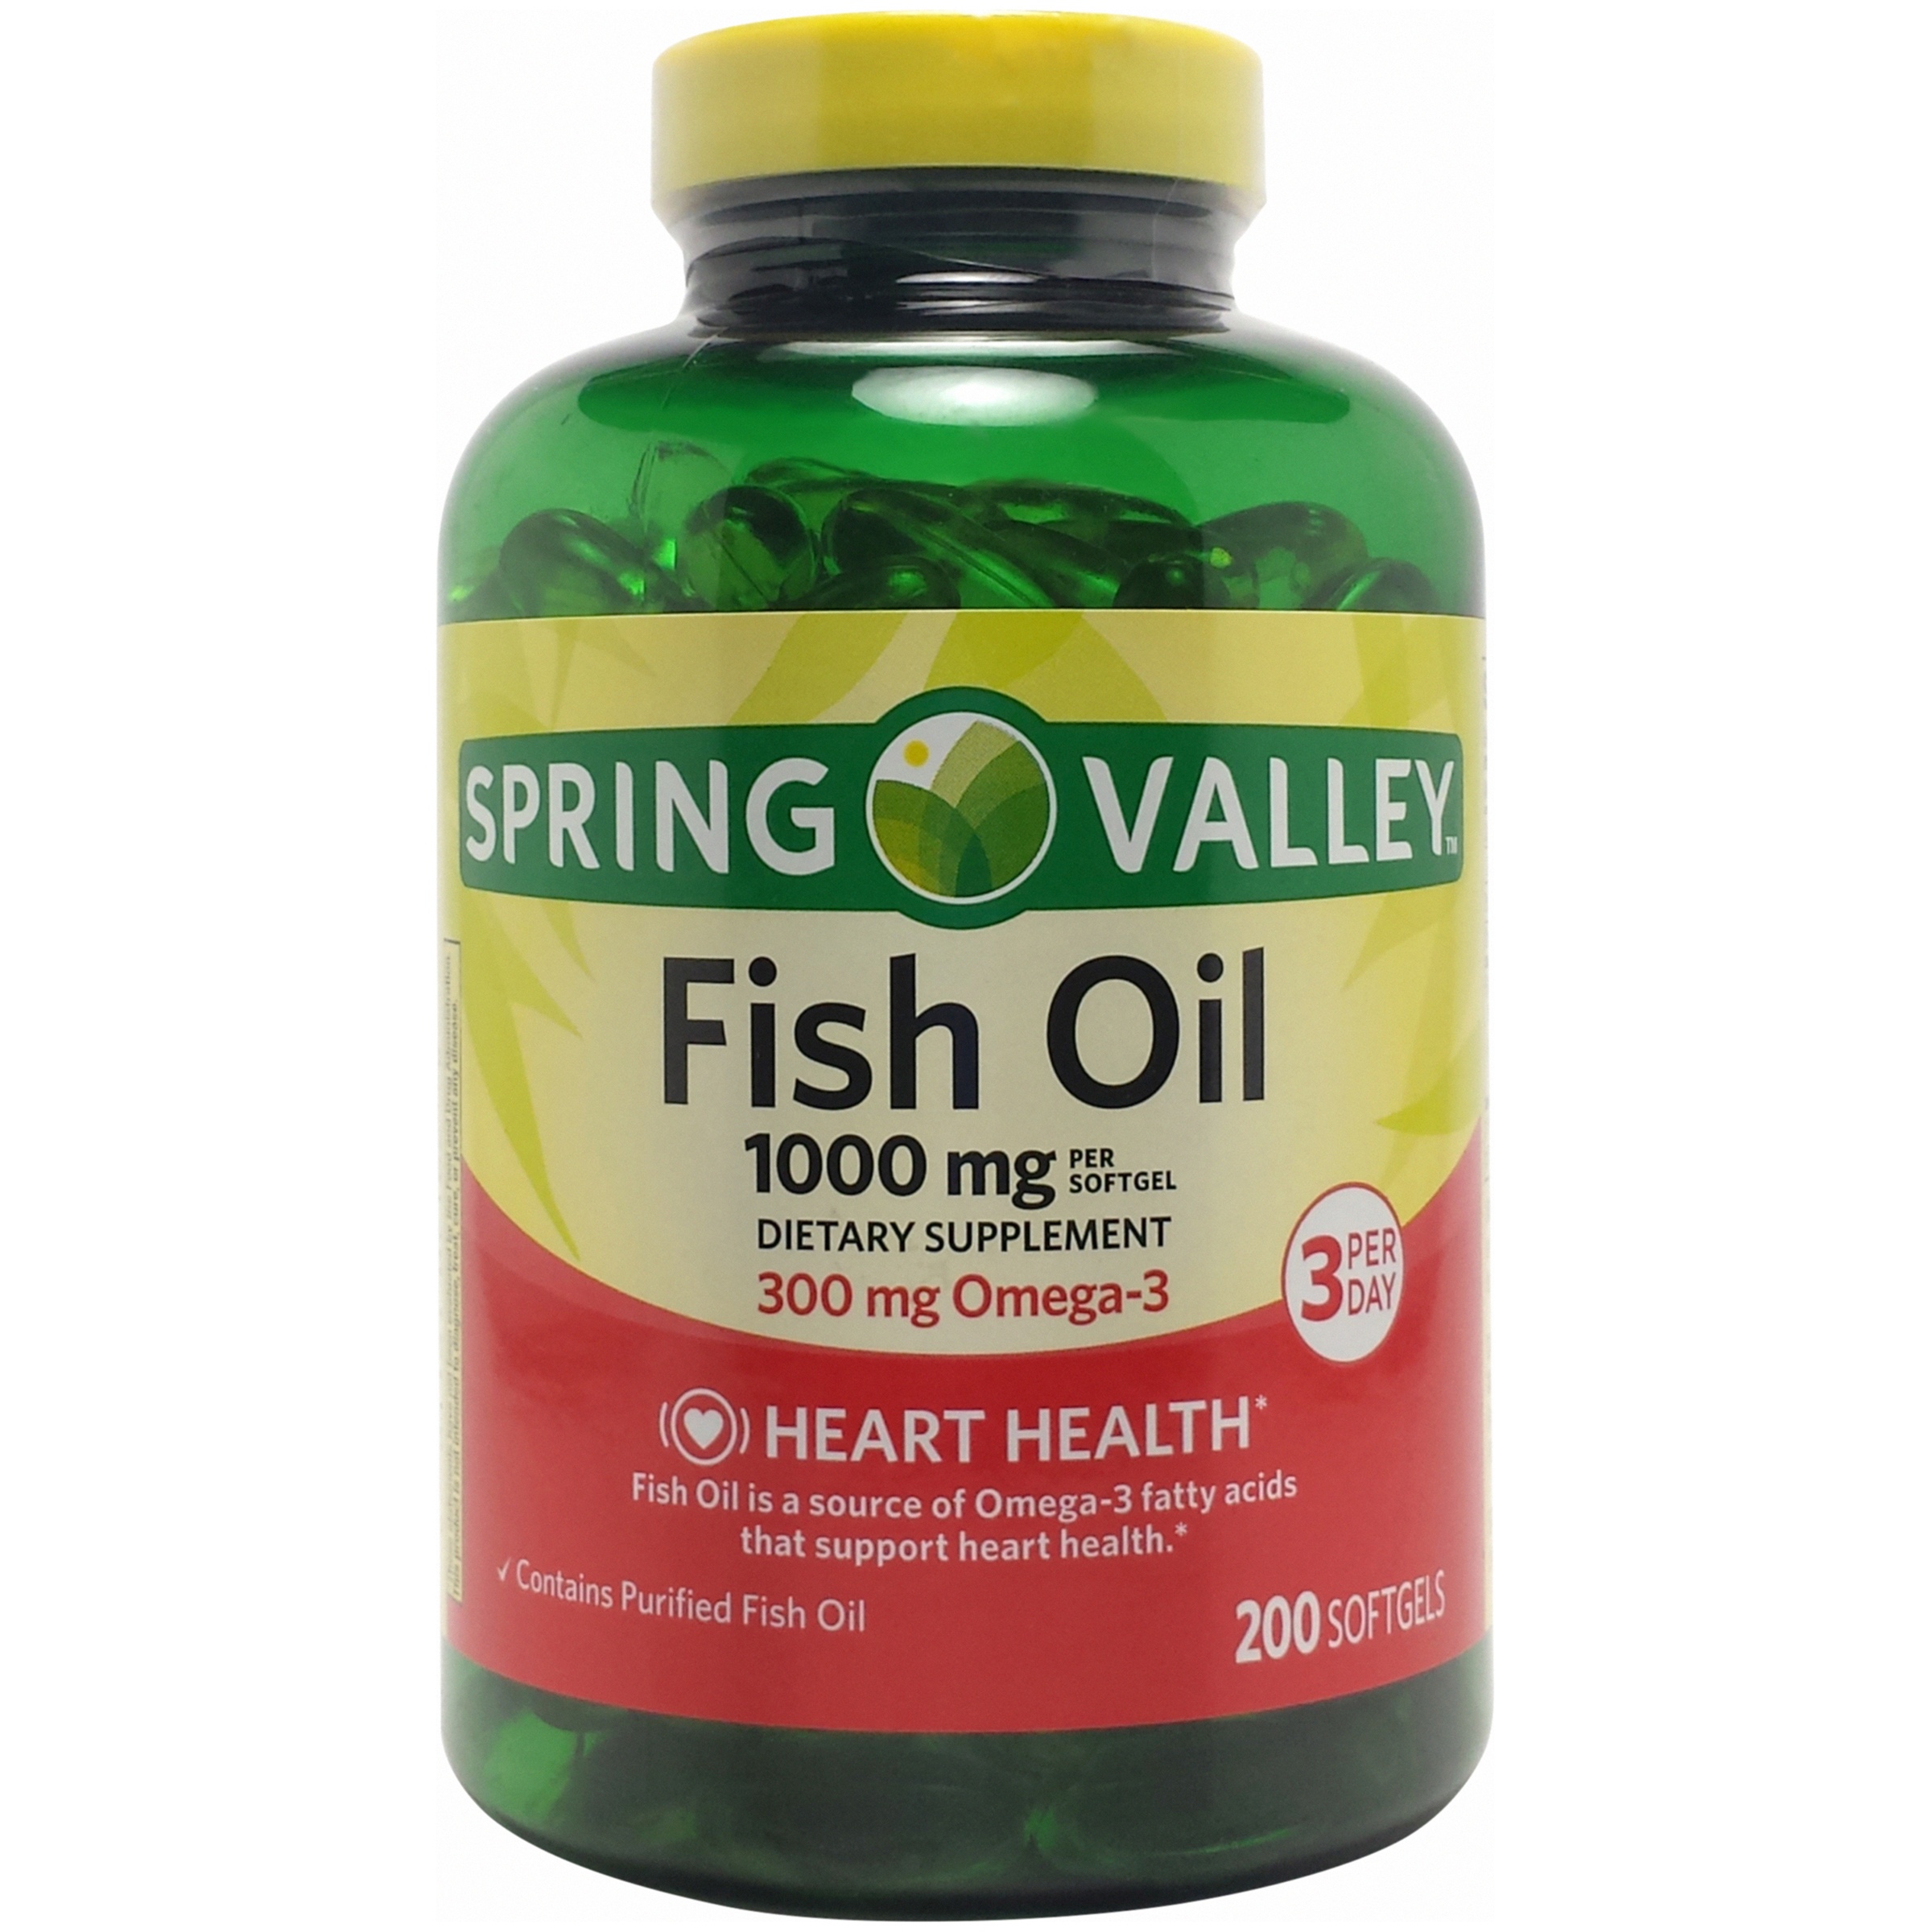 Spring Valley Fish Oil Mini, 600mg, 150ct, (2x75ct) - image 1 of 2